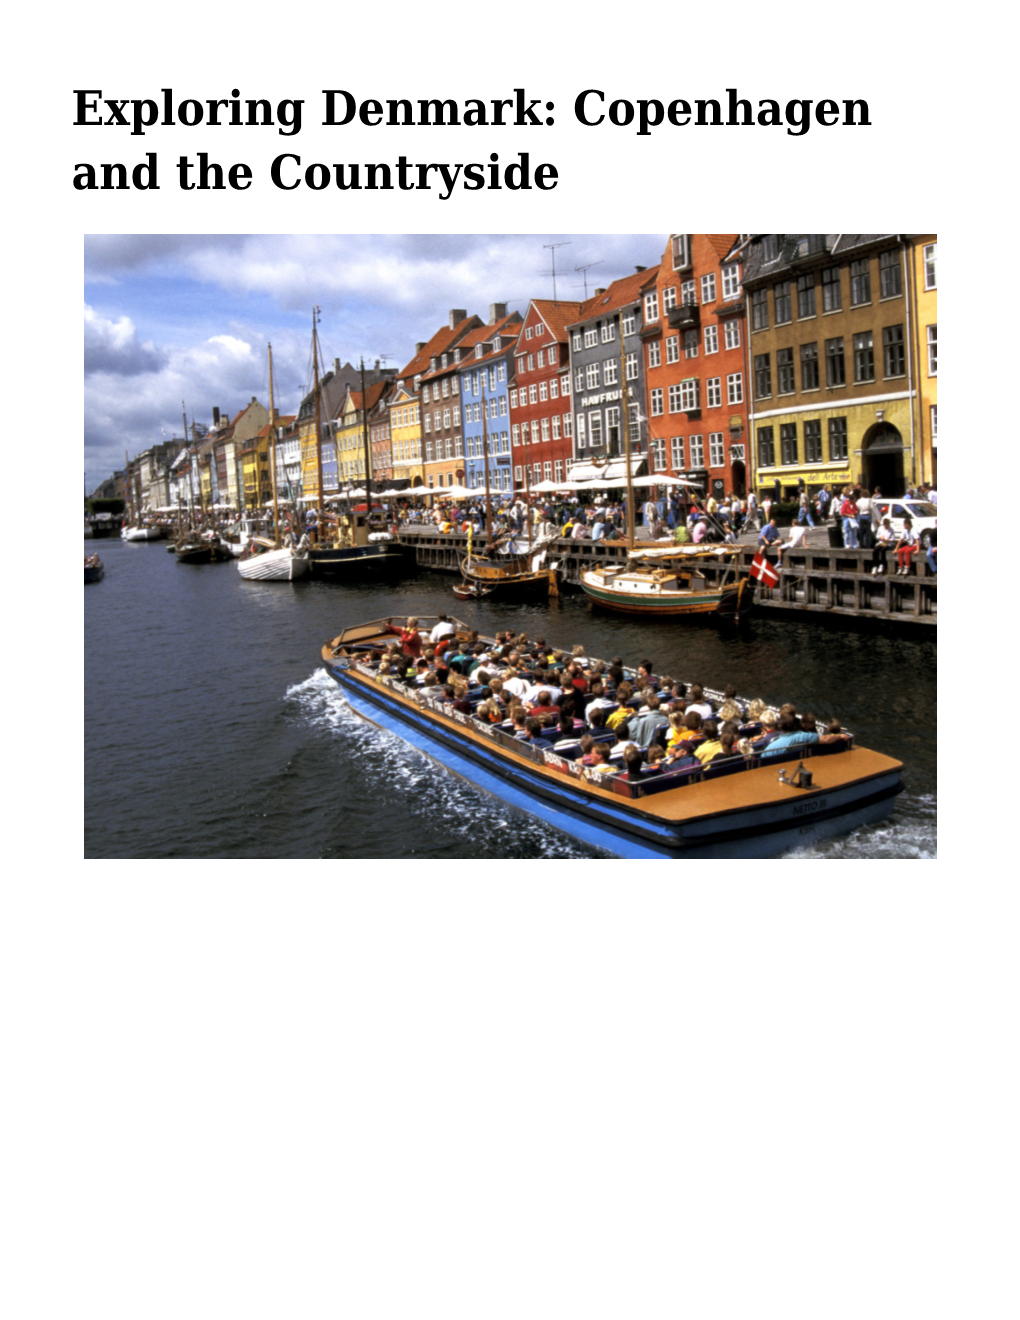 Copenhagen and the Countryside by Lee Foster